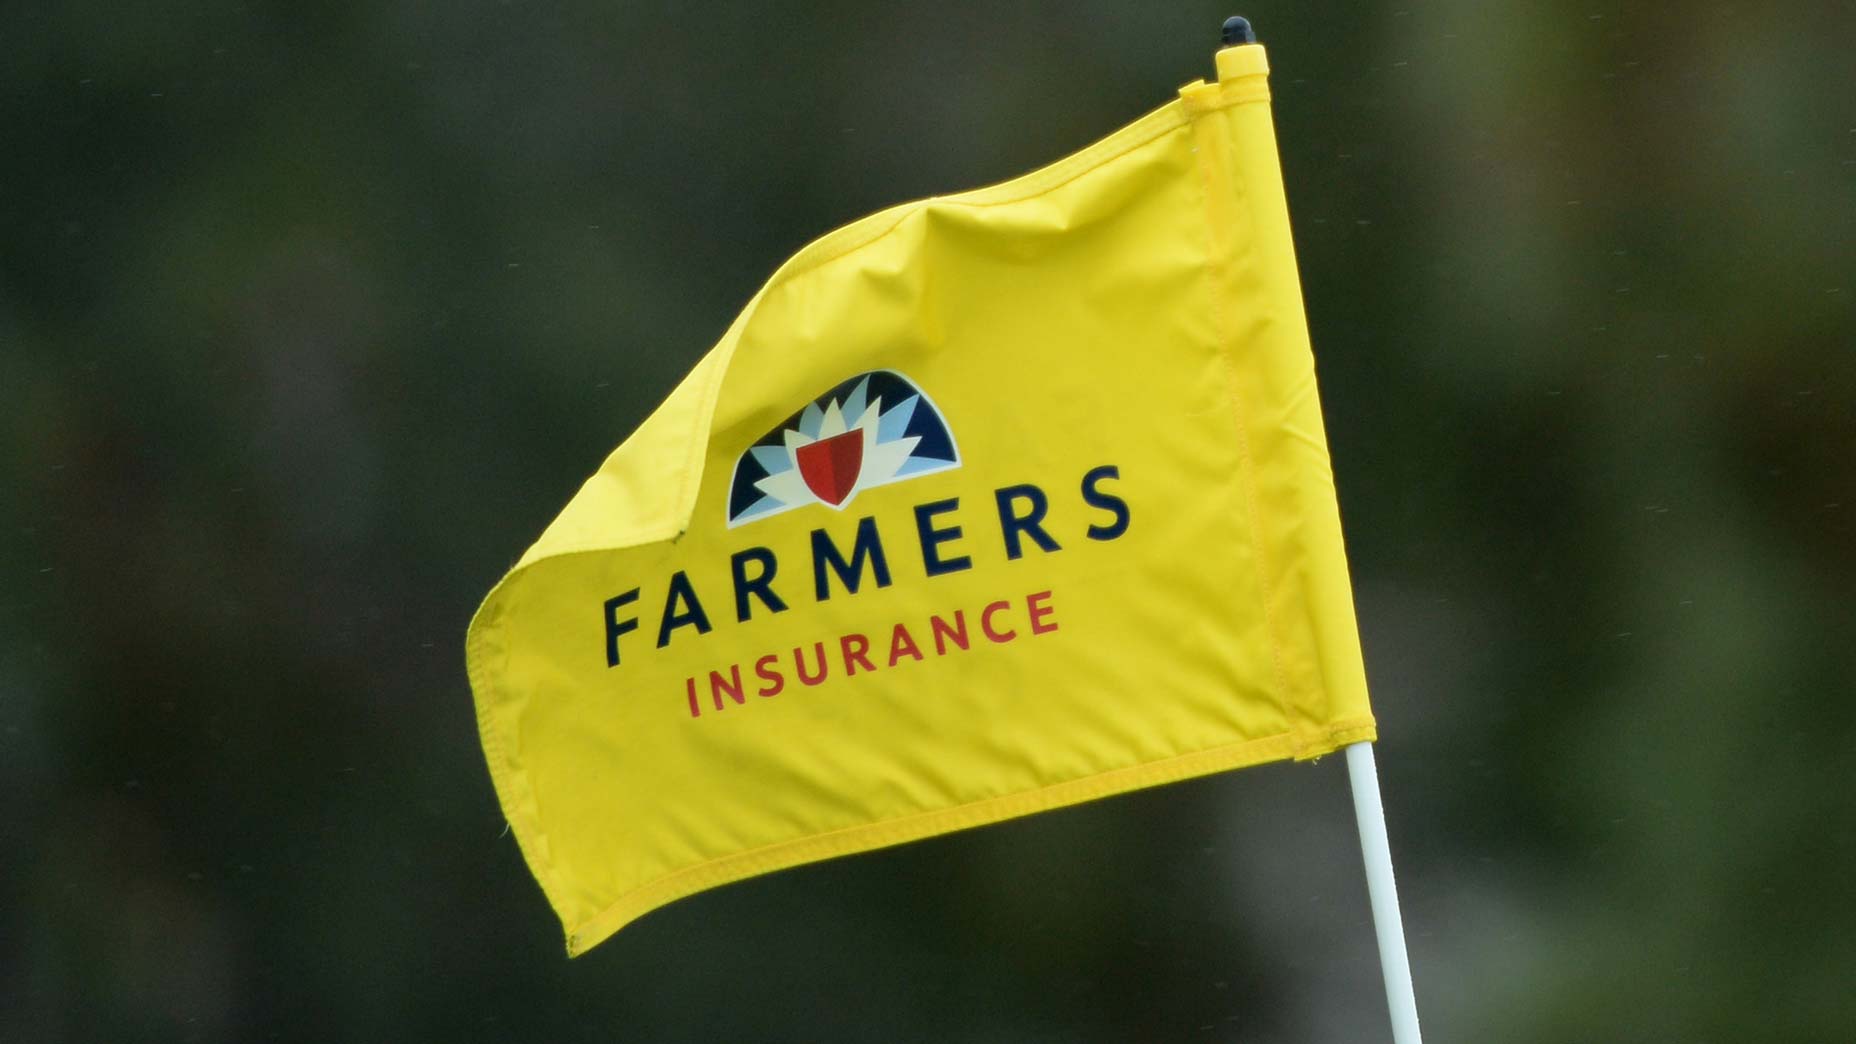 A yellow flag for the Farmers Insurance Open golf tournament waves in the wind